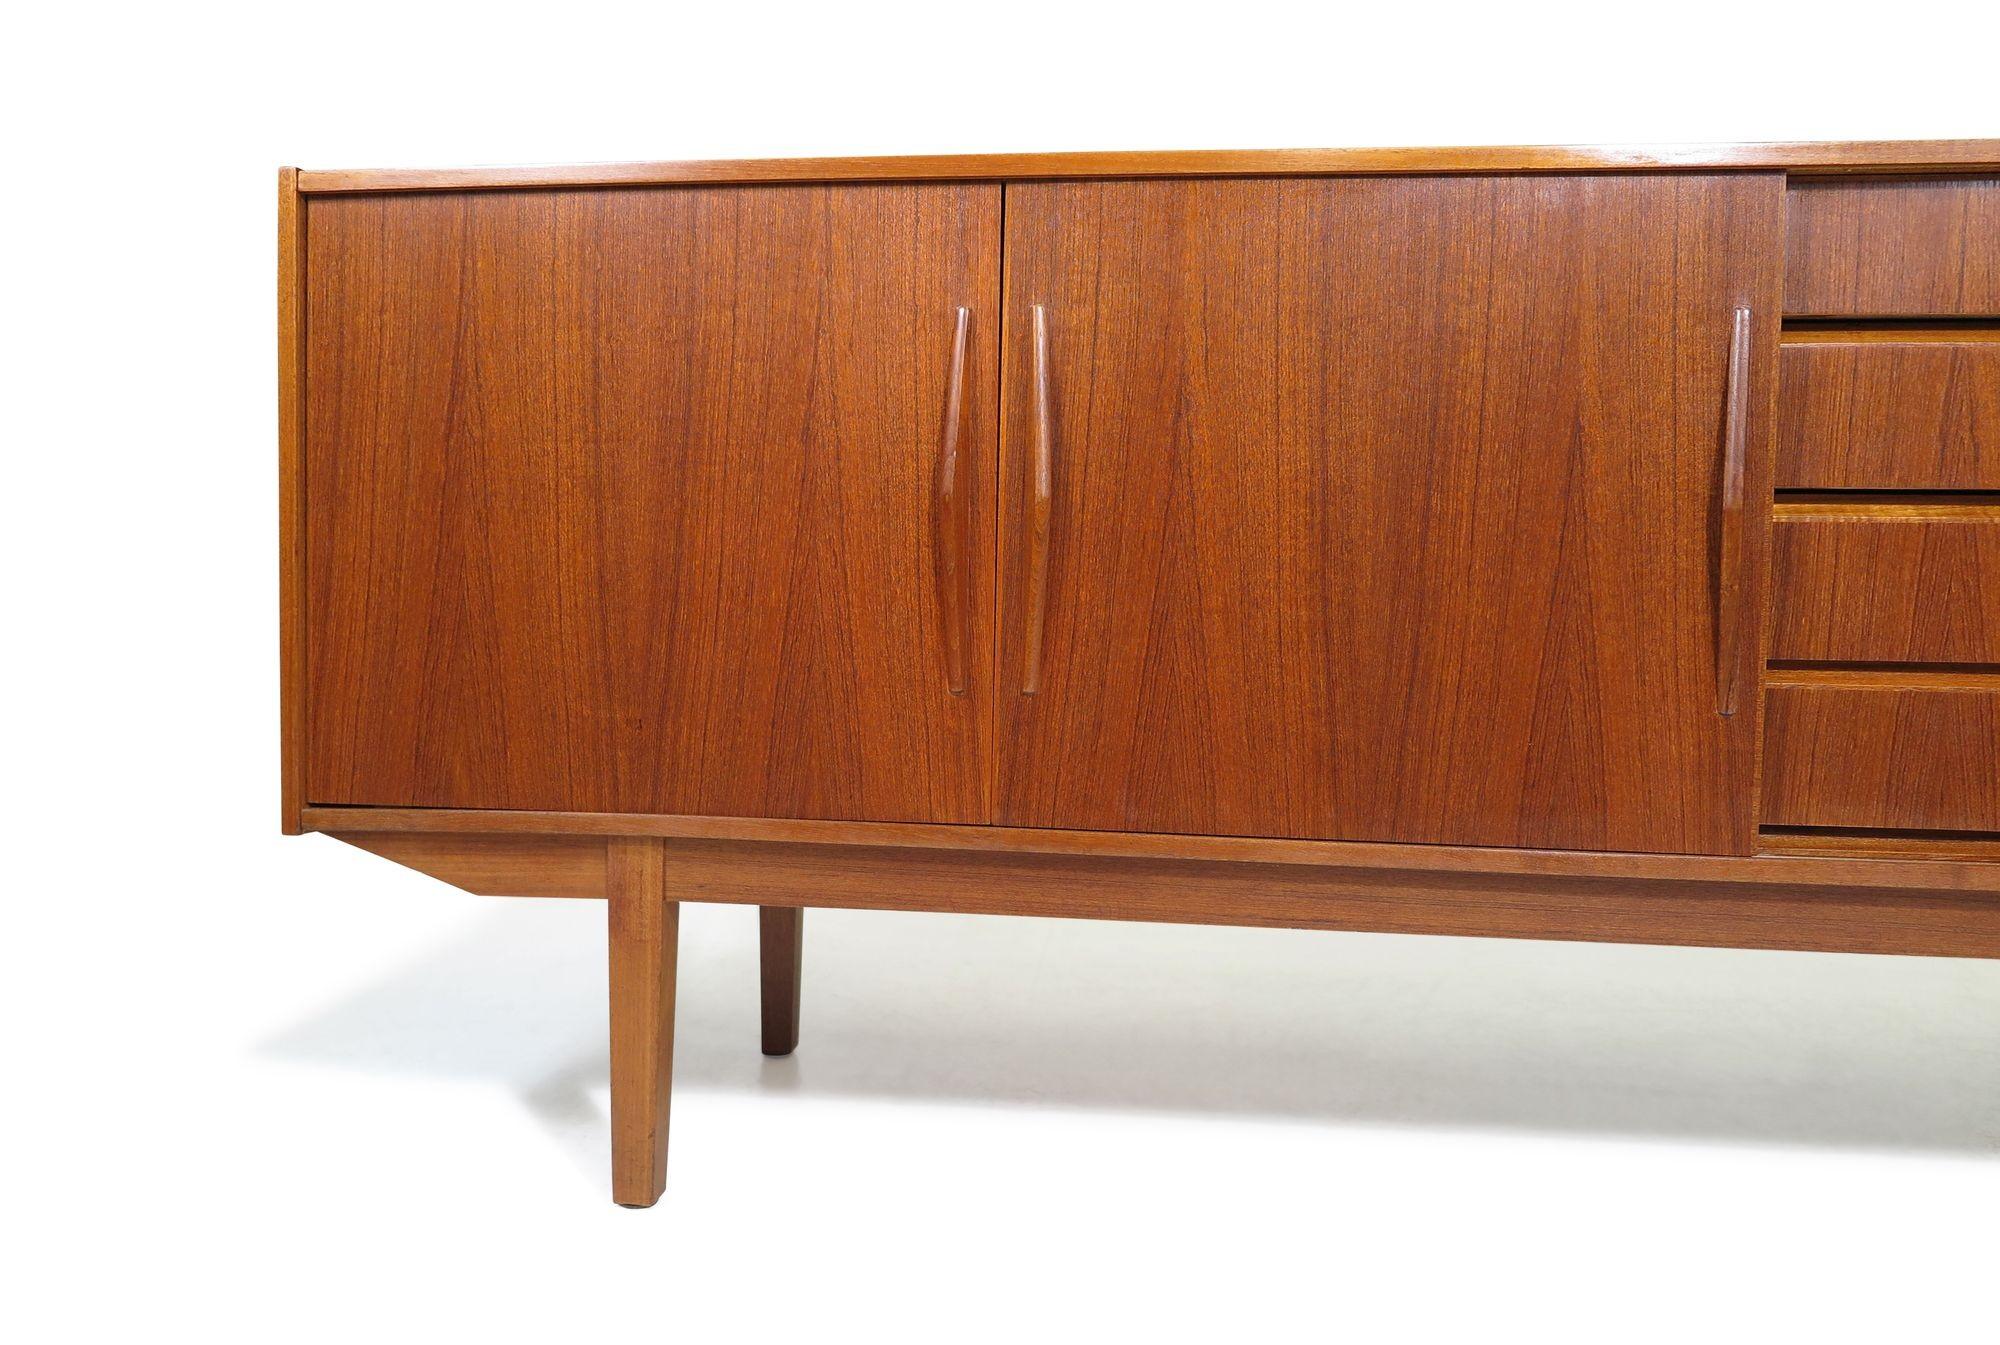 1960s Danish teak credenza crafted with three sliding doors and series of four drawers, each adorned with angled triangular pulls, raised on tapered legs. The interior is made of cuban mahogany with adjustable shelves. Restored in a natural oil